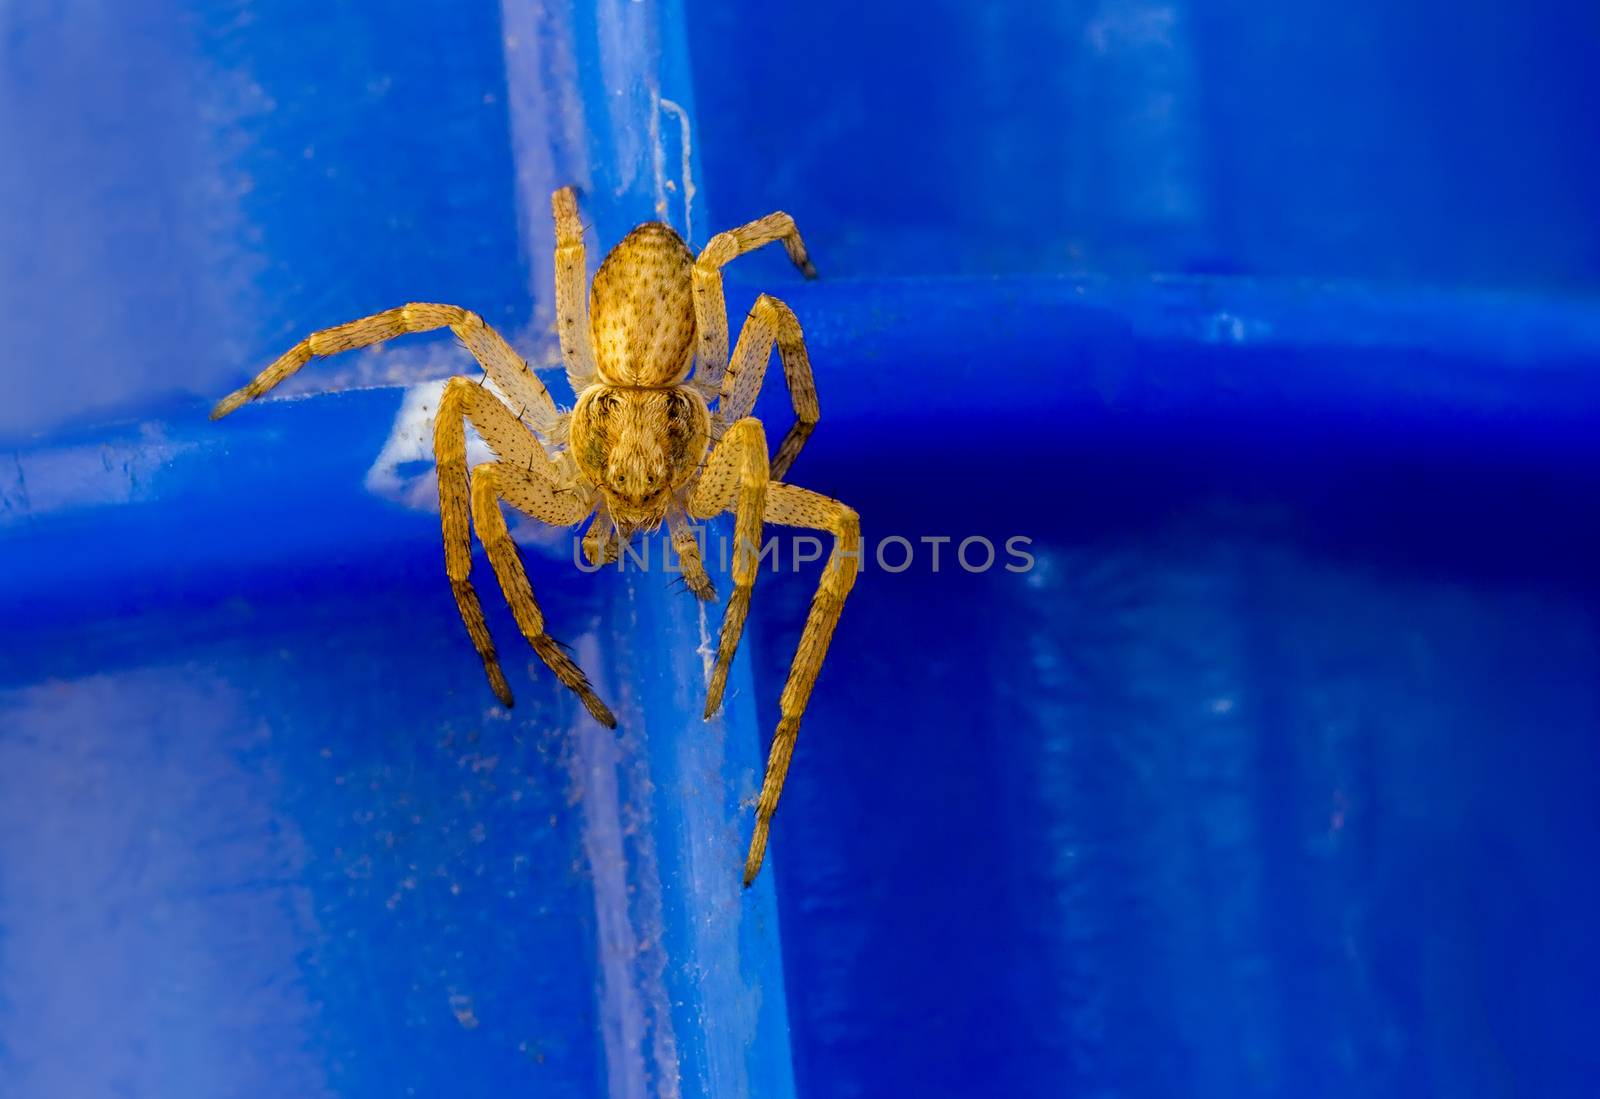 Small yellow spider on blue background